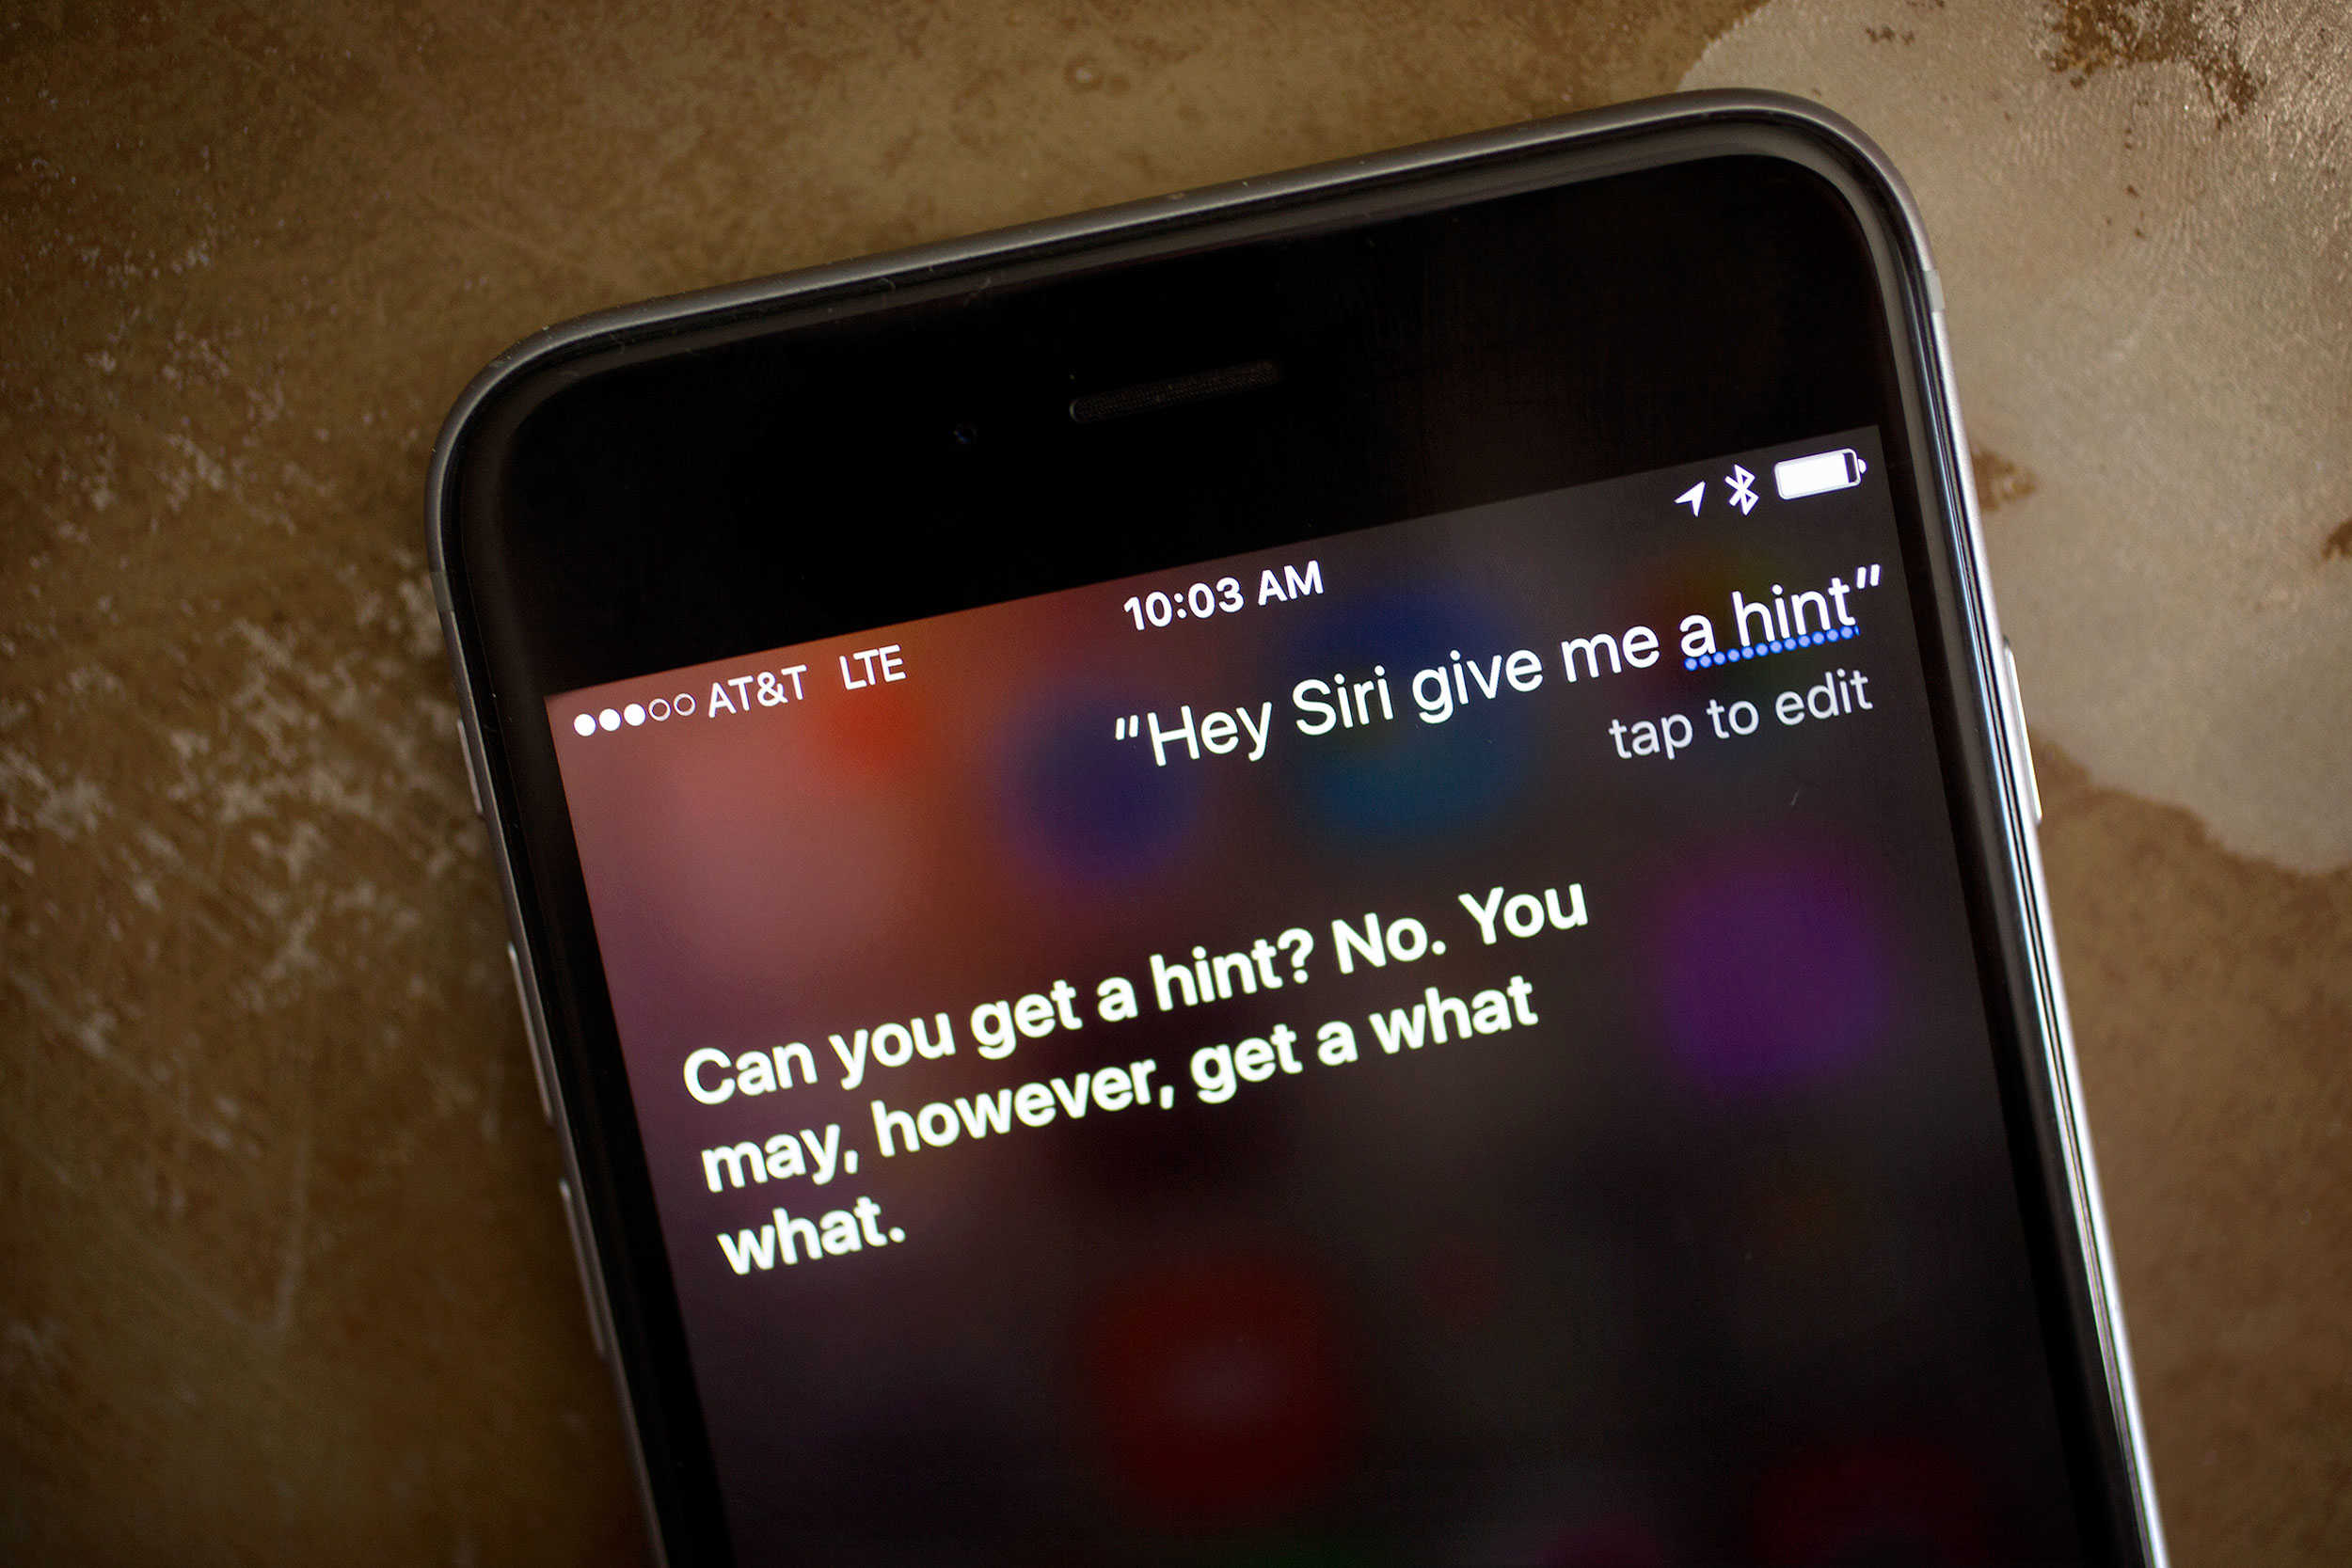 Don't even bother asking Siri for a hint.